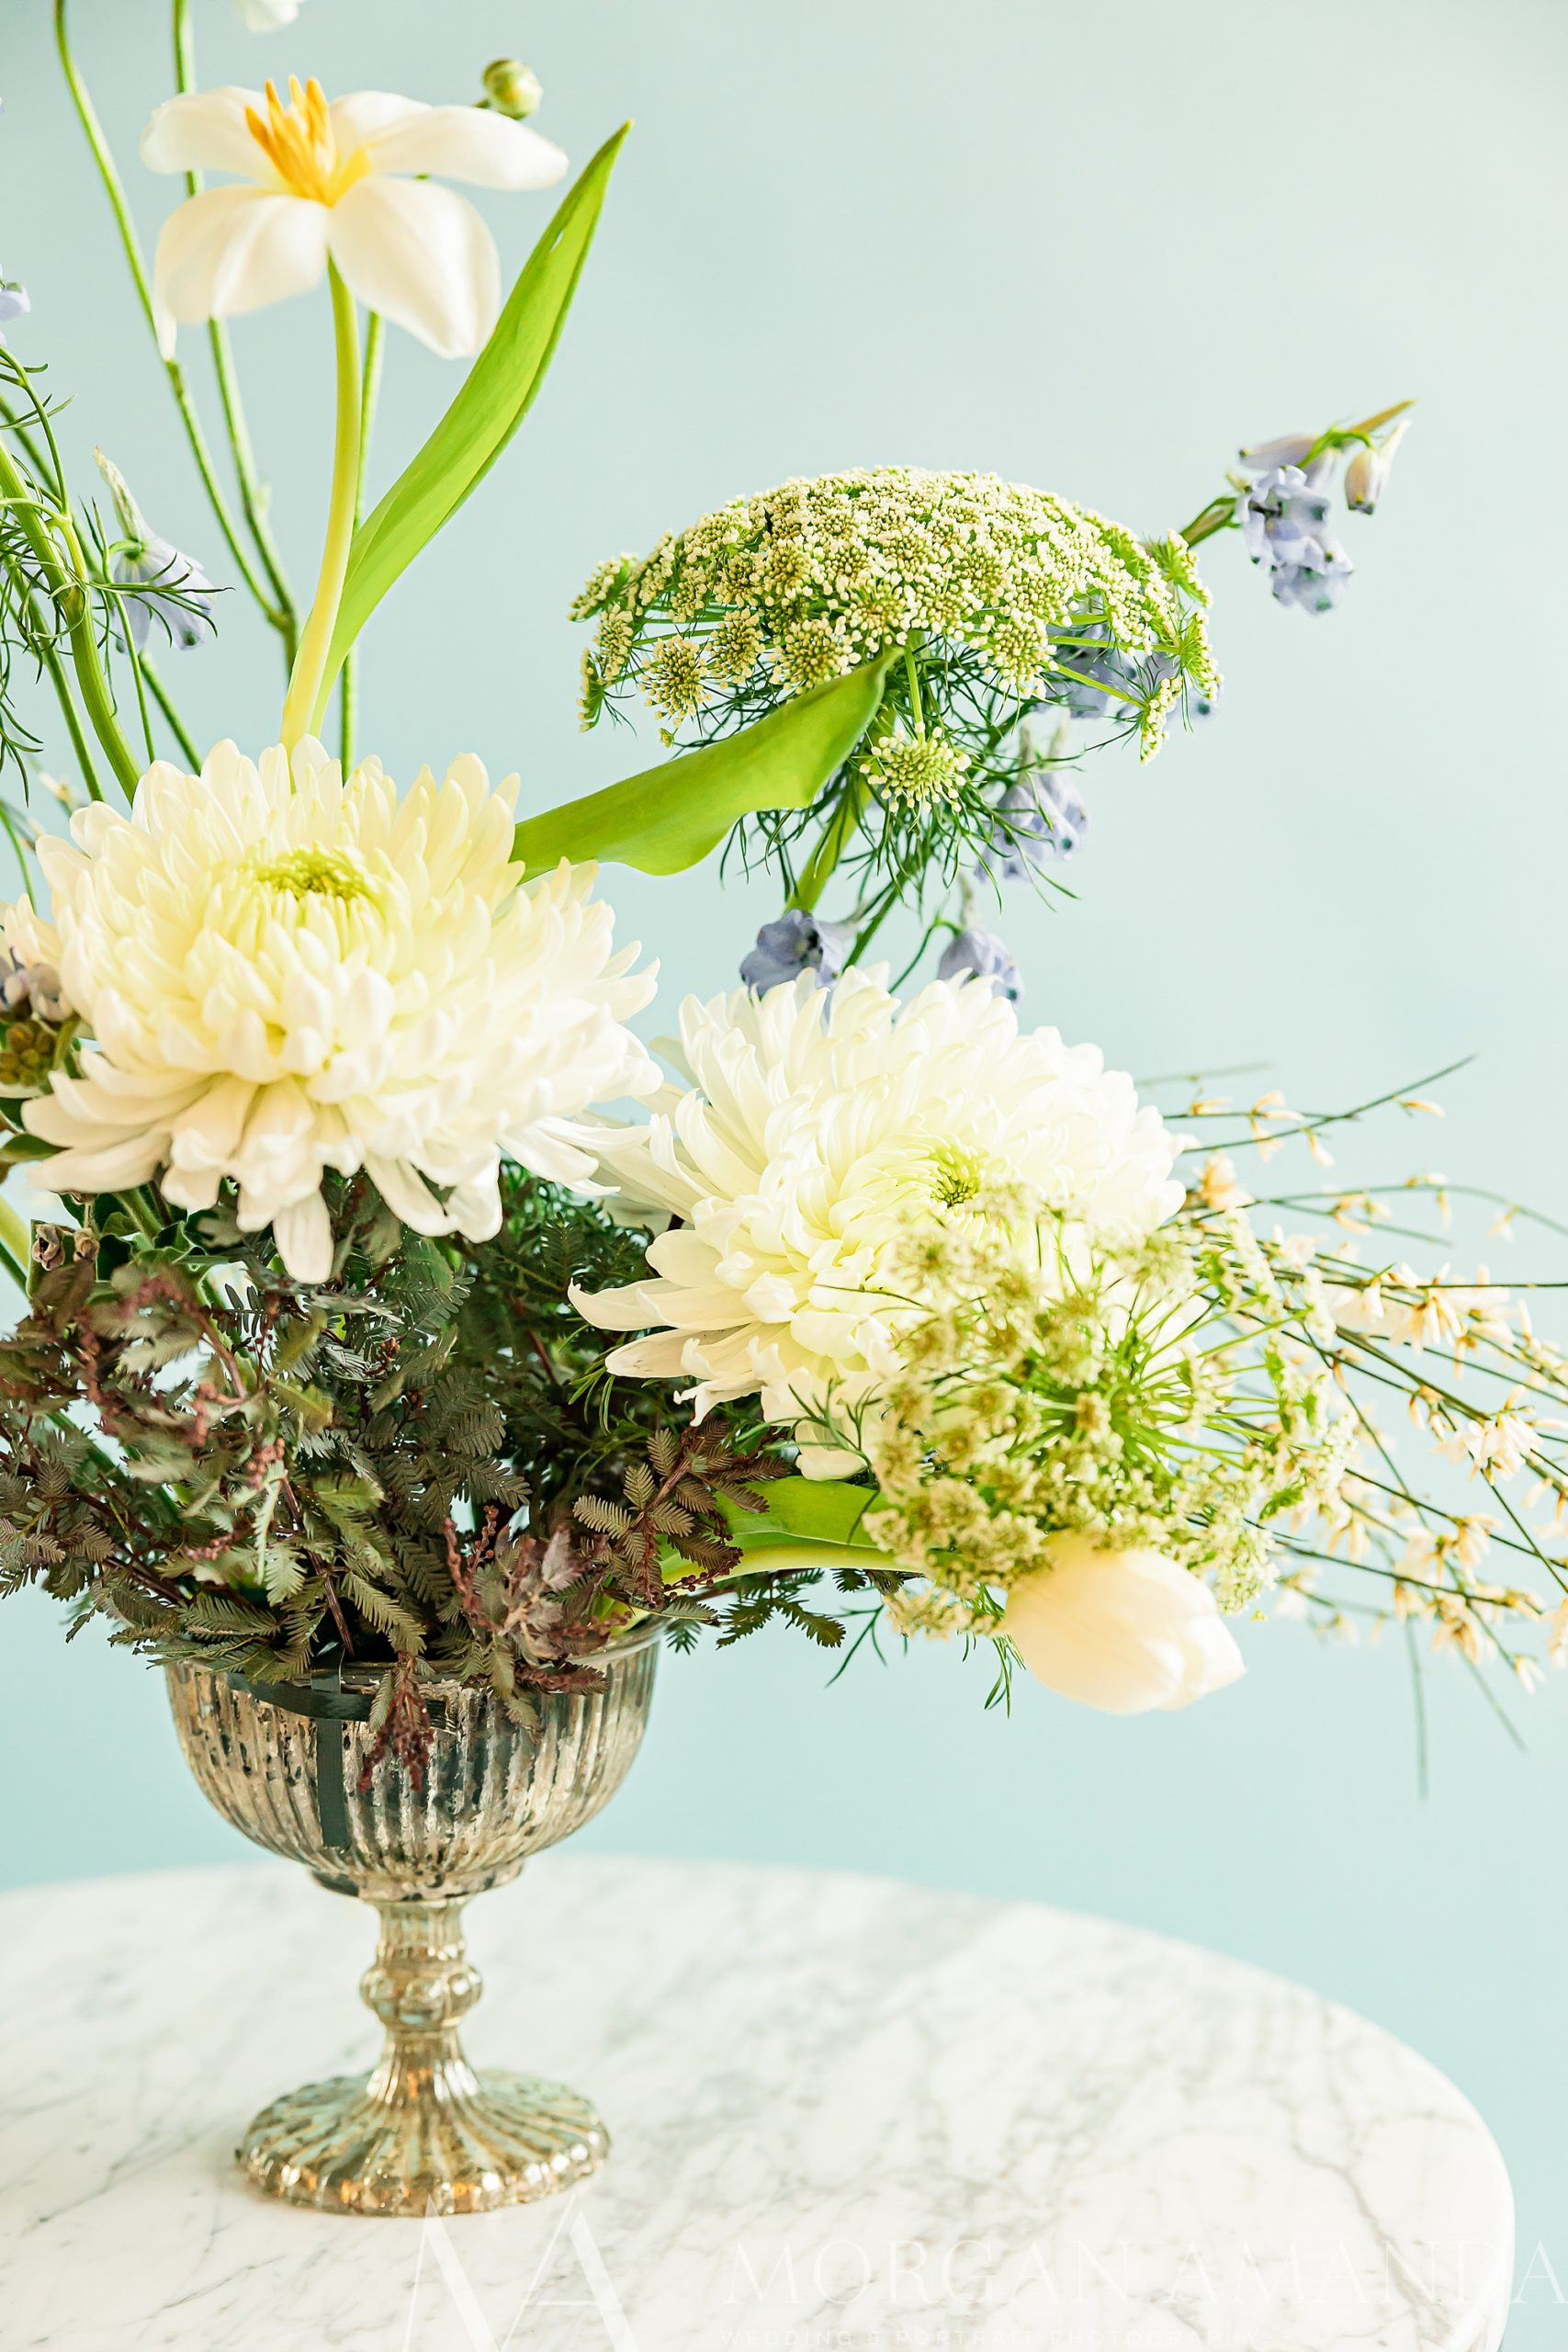 floral arrangement wit green and white flowers in gold container